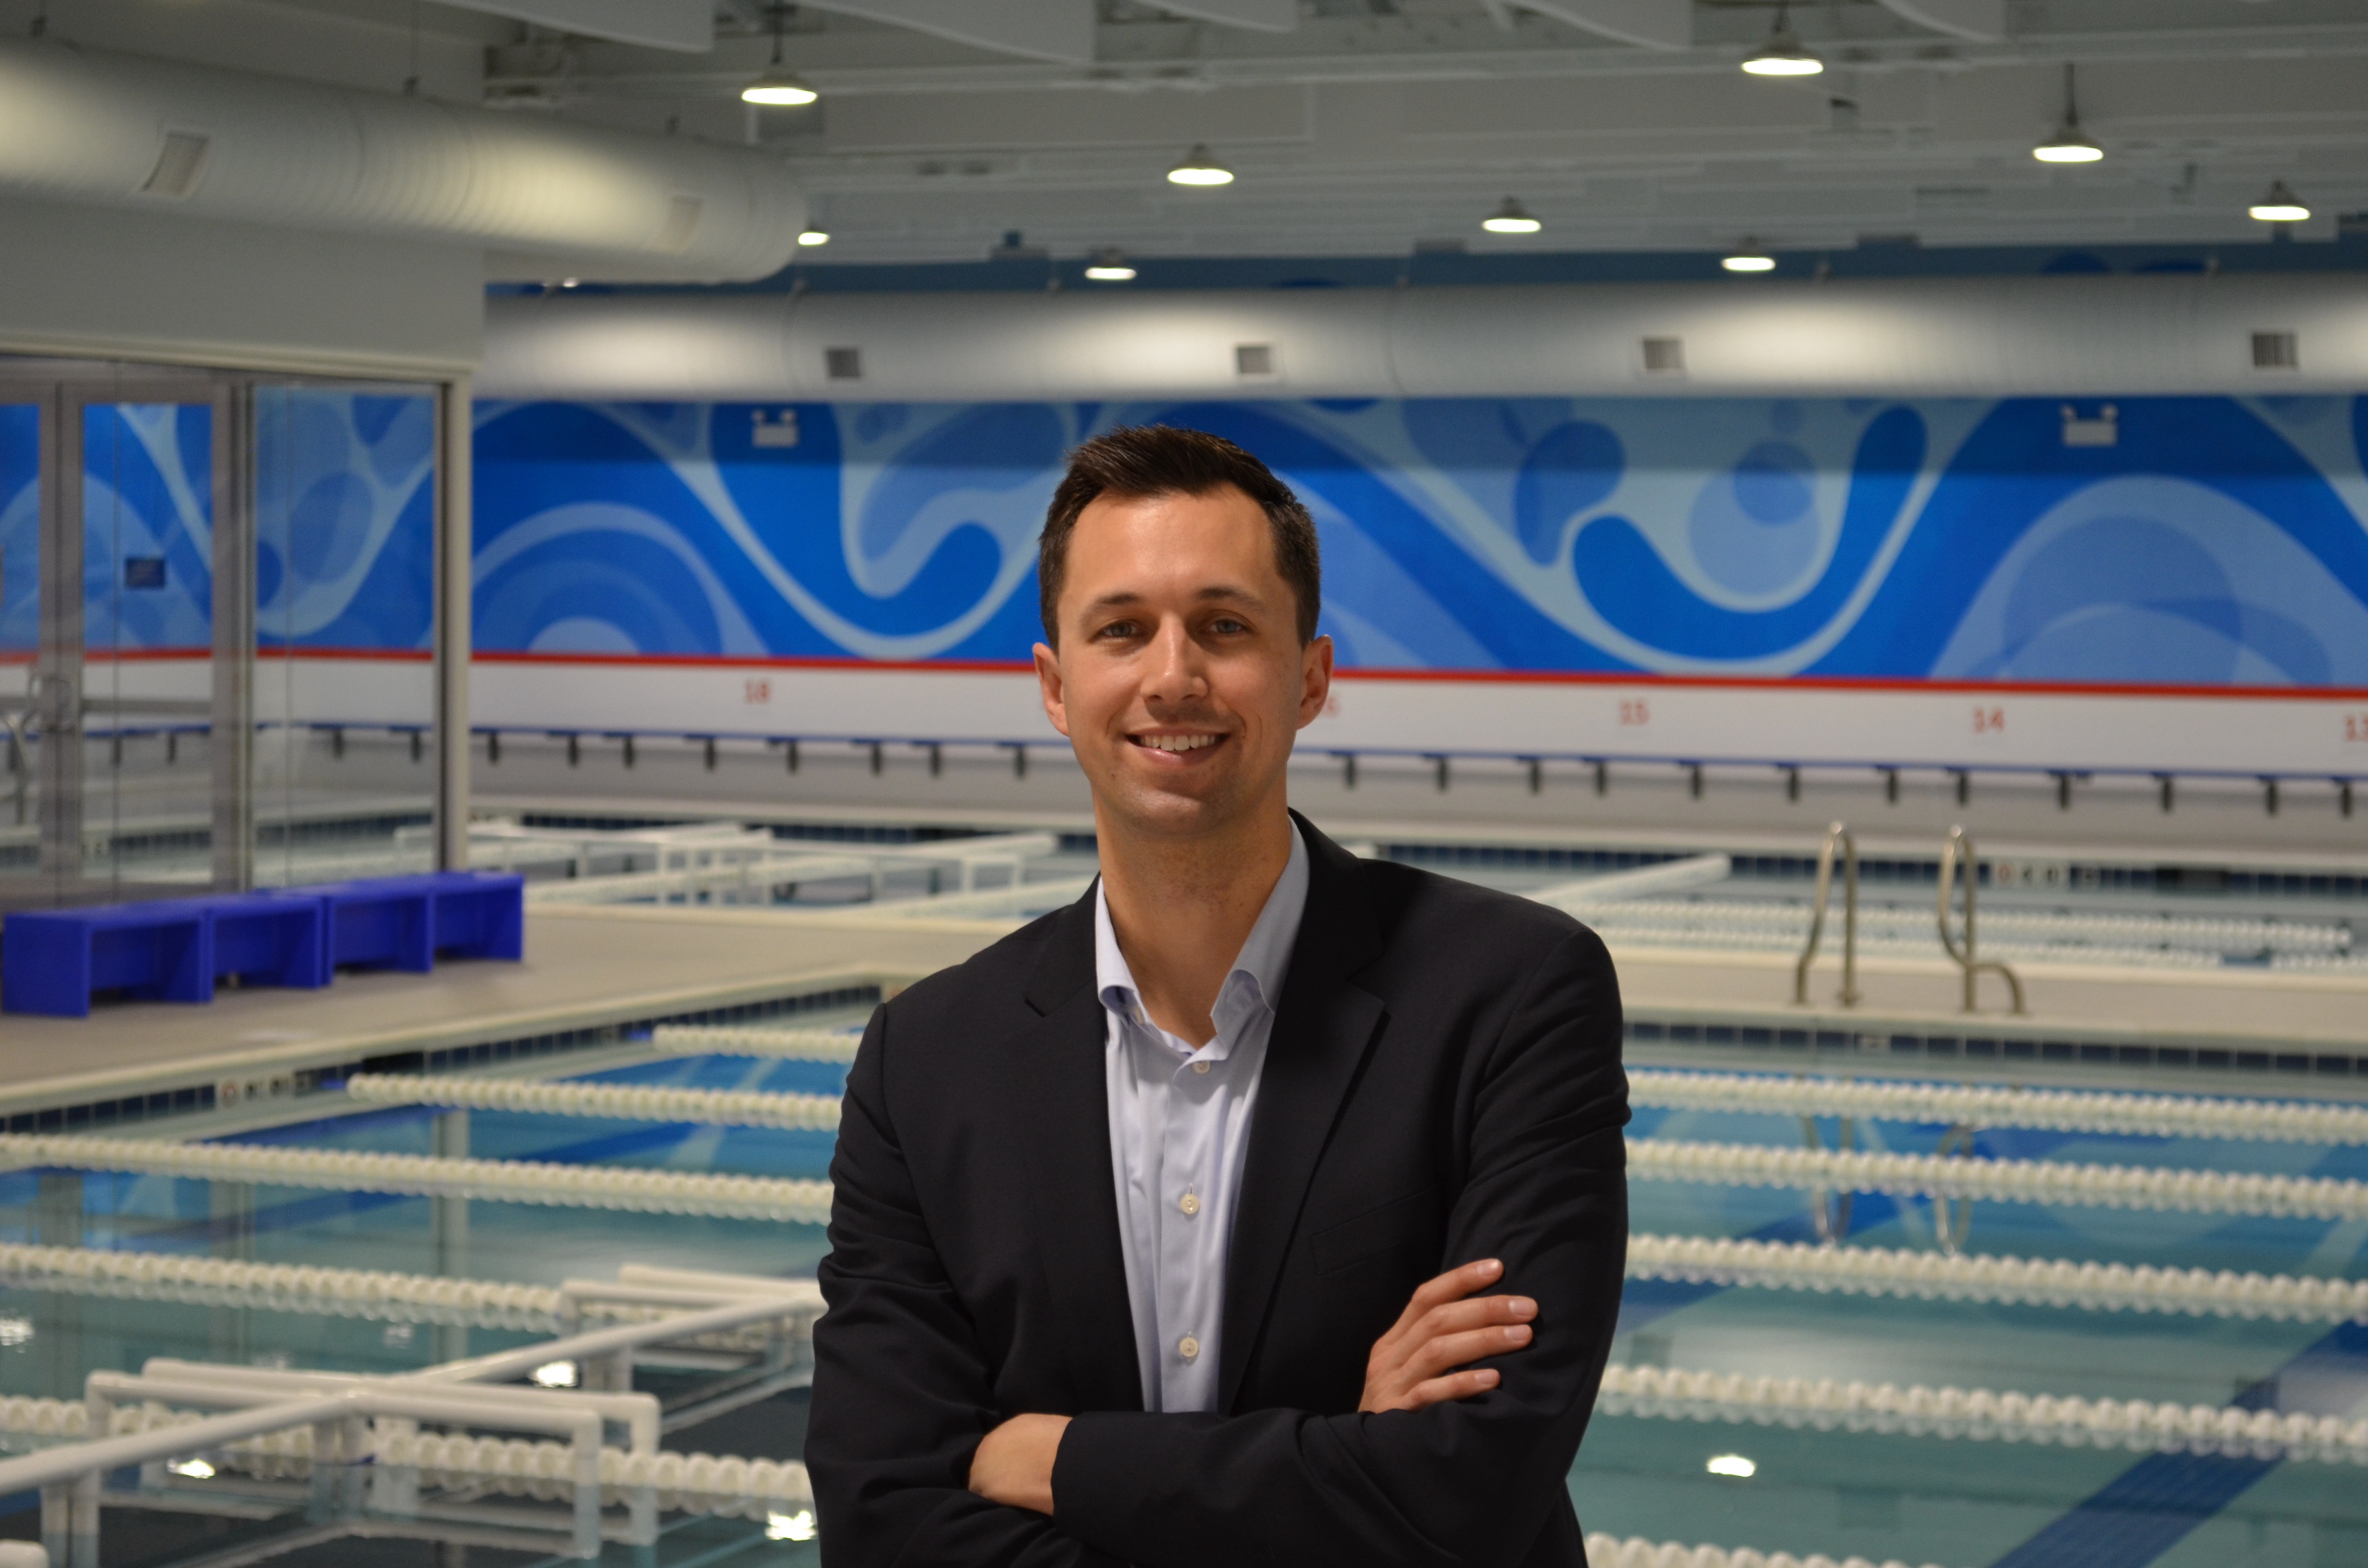 Chris DeJong, founder of Big Blue Swim School, says the excitement the Olympics generates is important because swimming lessons deliver a critical life skill that every child needs.